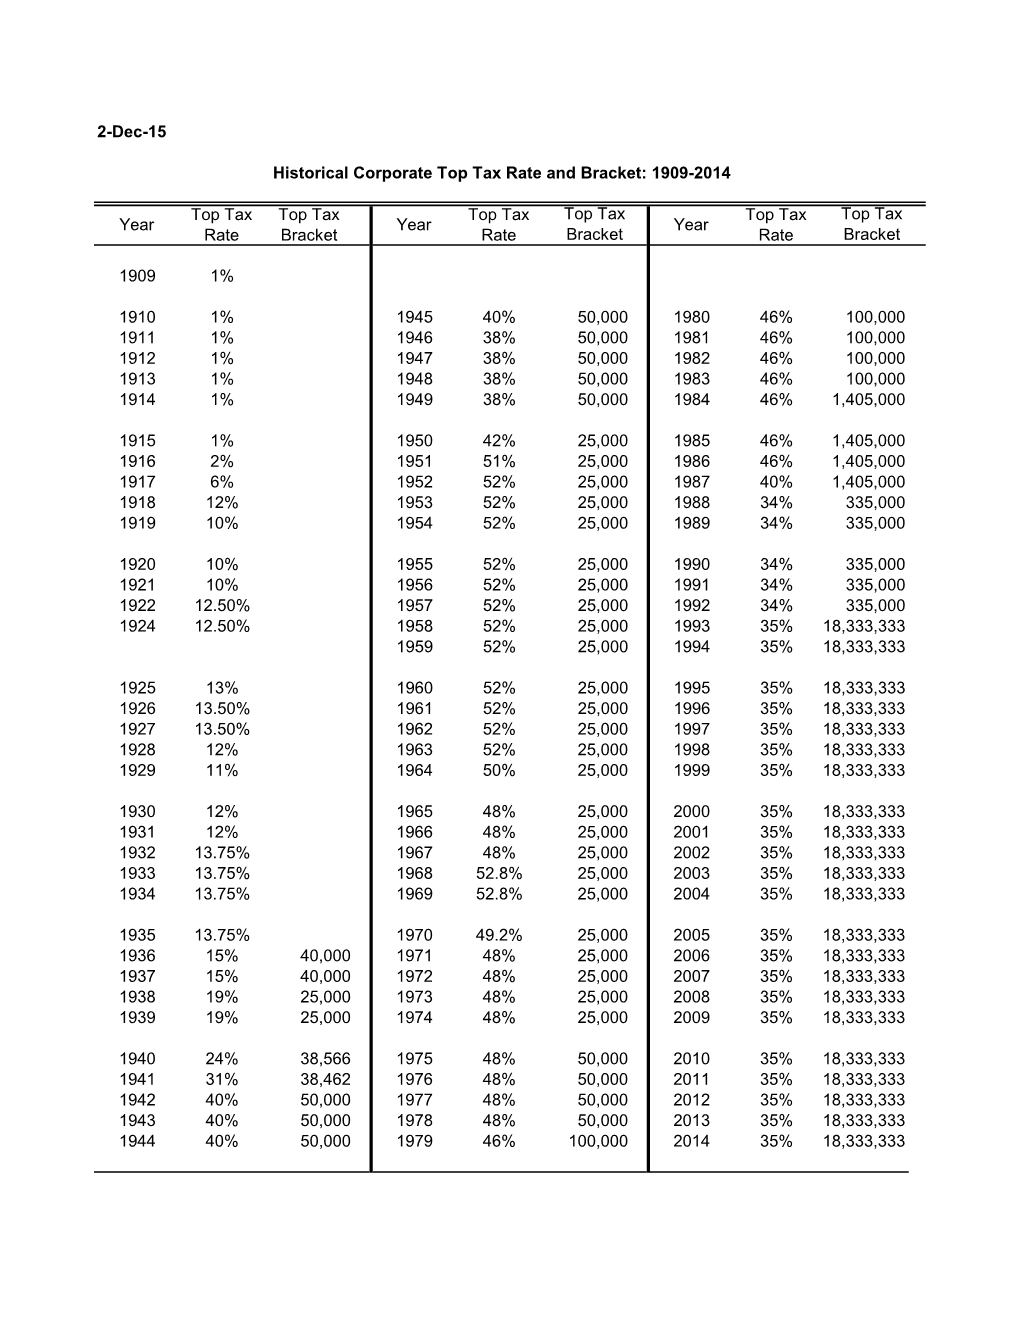 2-Dec-15 Historical Corporate Top Tax Rate and Bracket